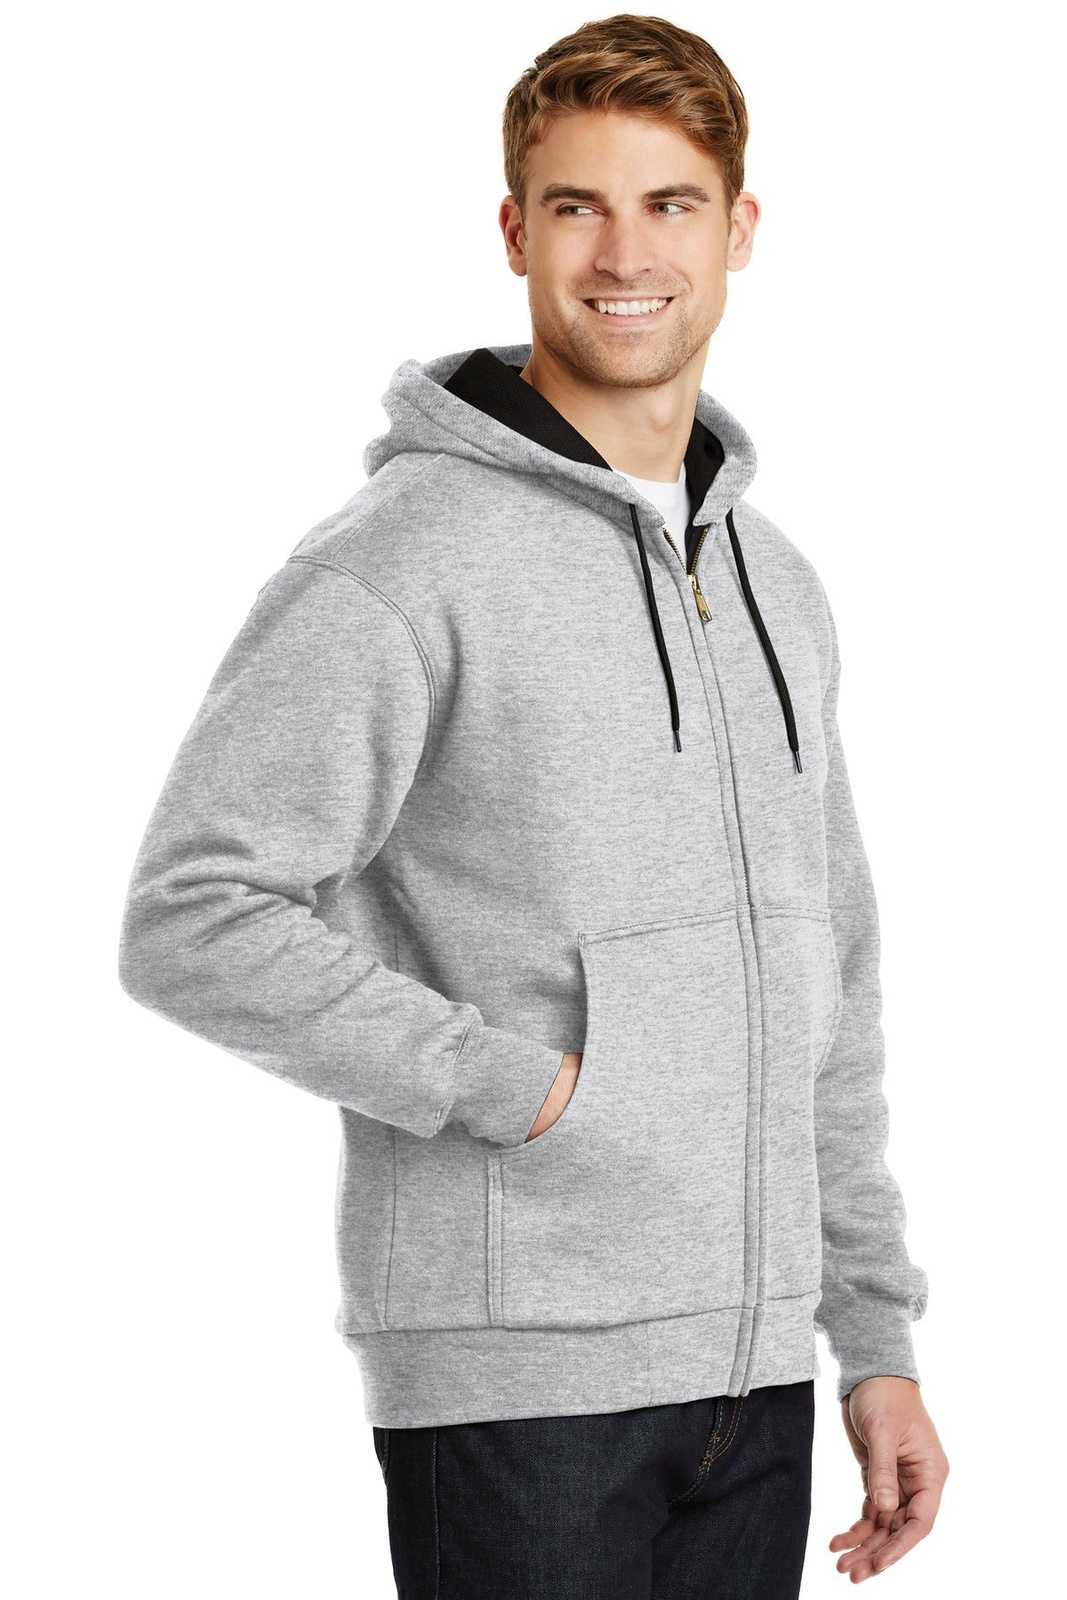 CornerStone CS620 Heavyweight Full-Zip Hooded Sweatshirt with Thermal Lining - Athletic Heather - HIT a Double - 4